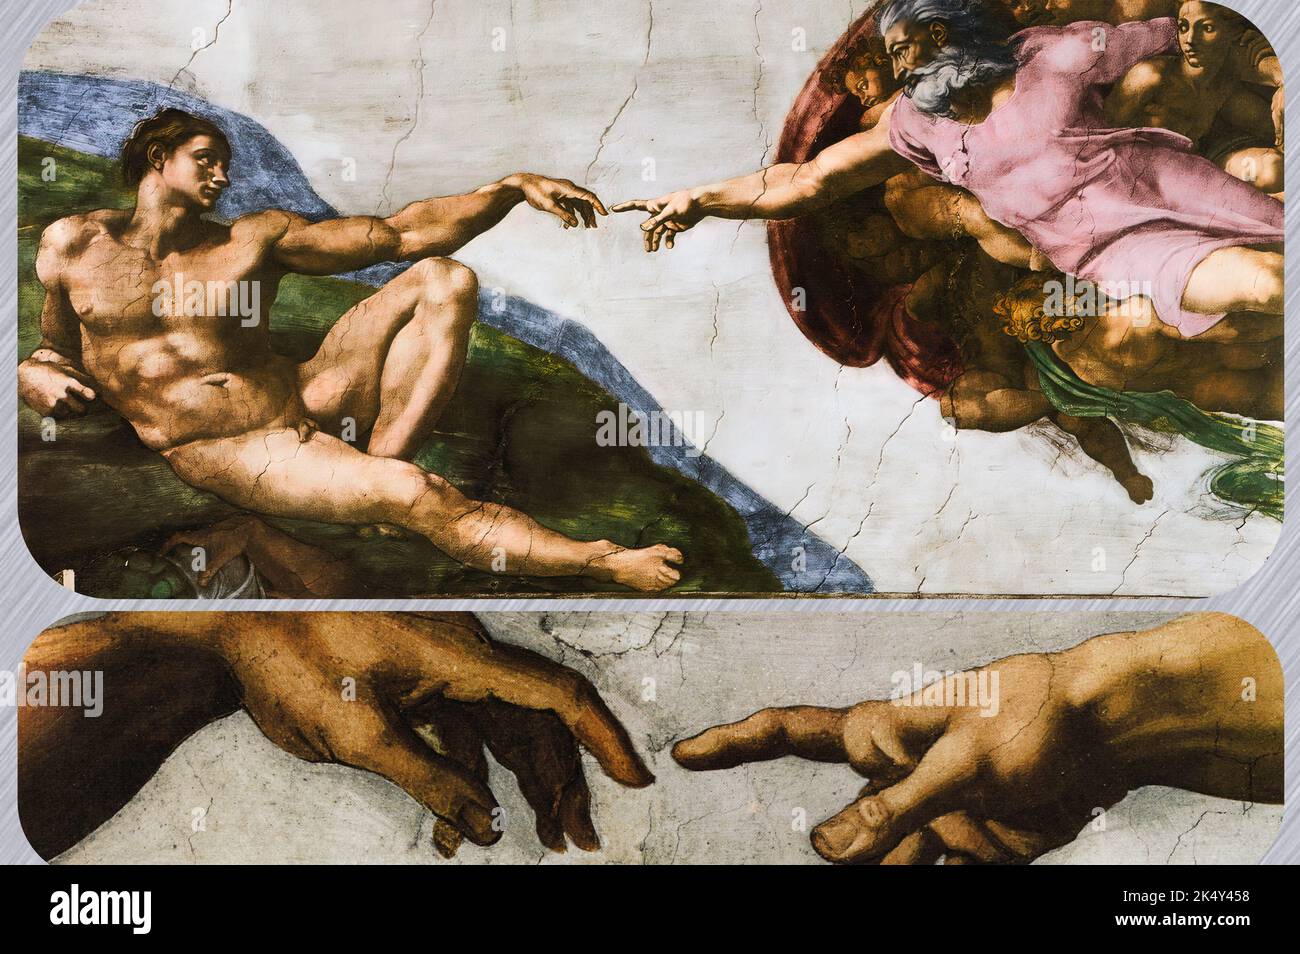 Some details of the famous masterpiece -The Creation of Adam by Michelangelo at the Sistine chapel, Vatican, Rome, Italy Stock Photo